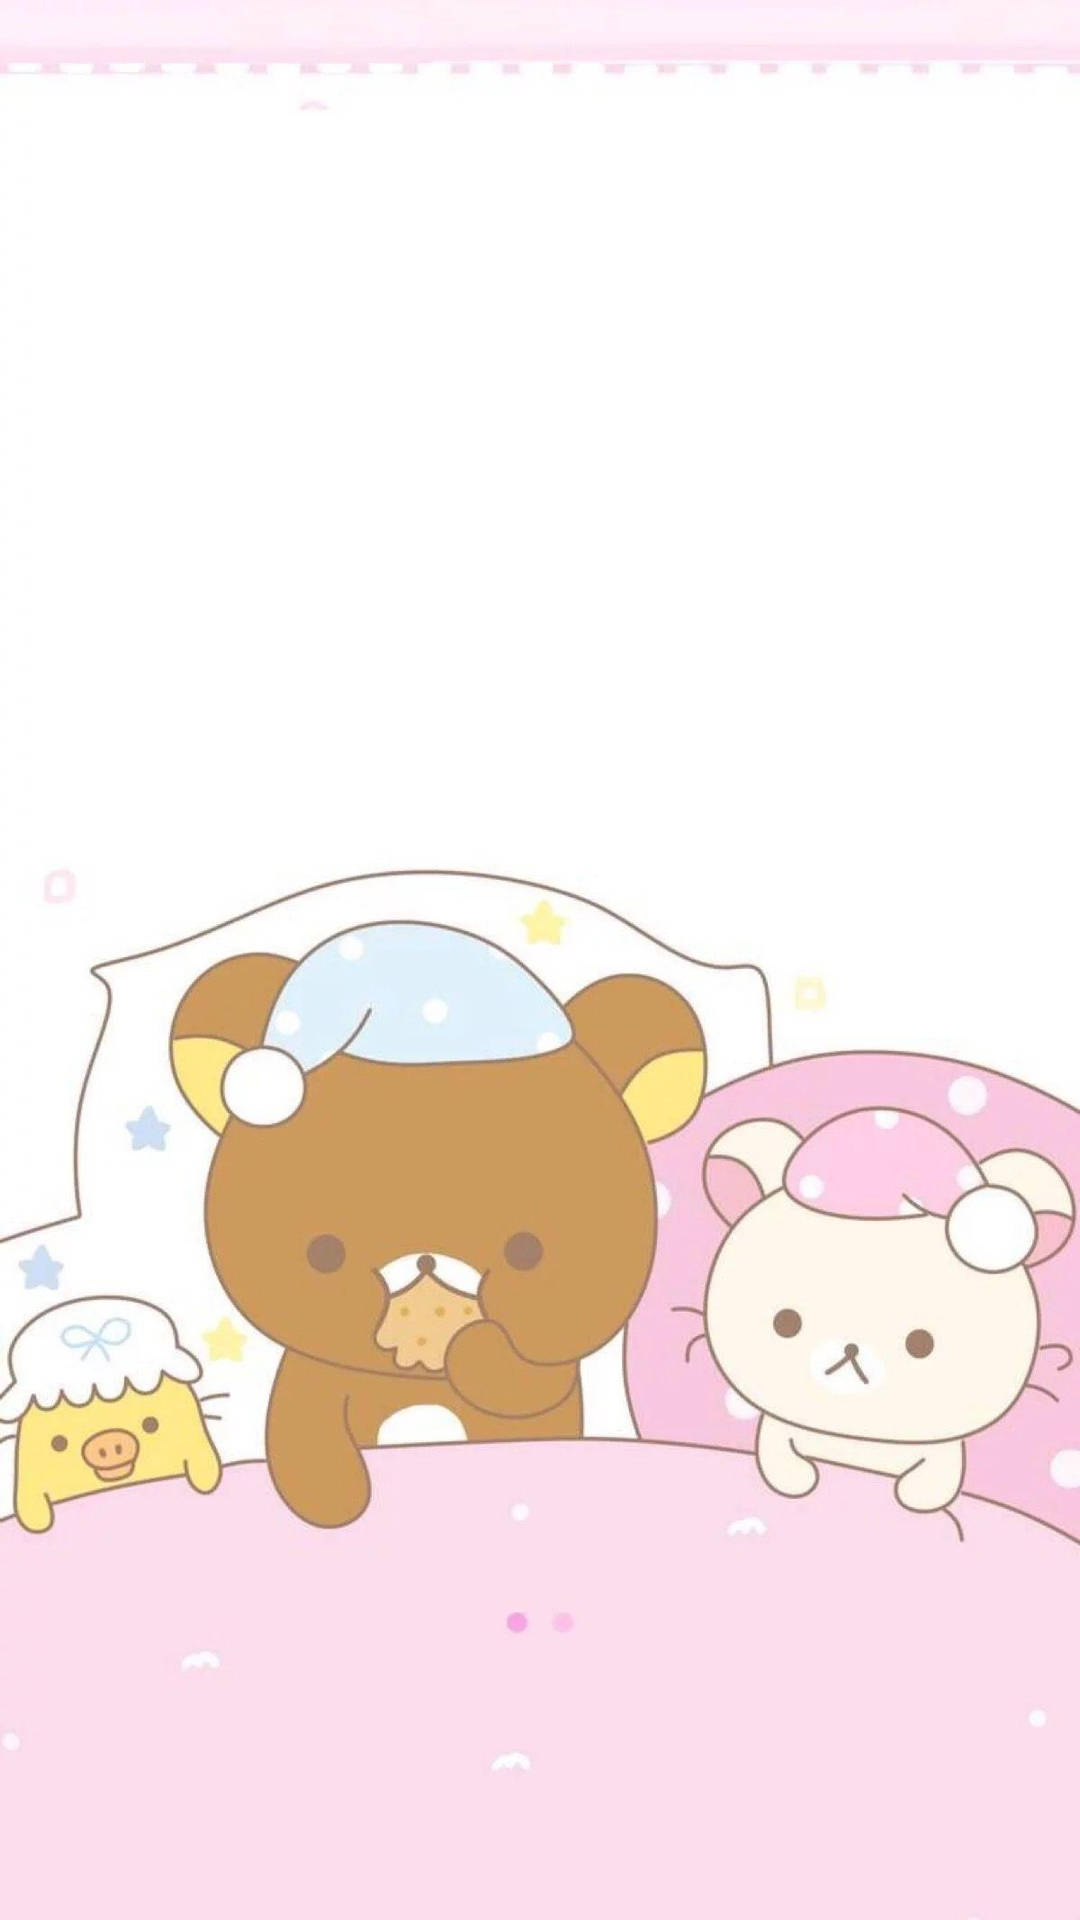 Kawaii Characters For Iphone Screen Background